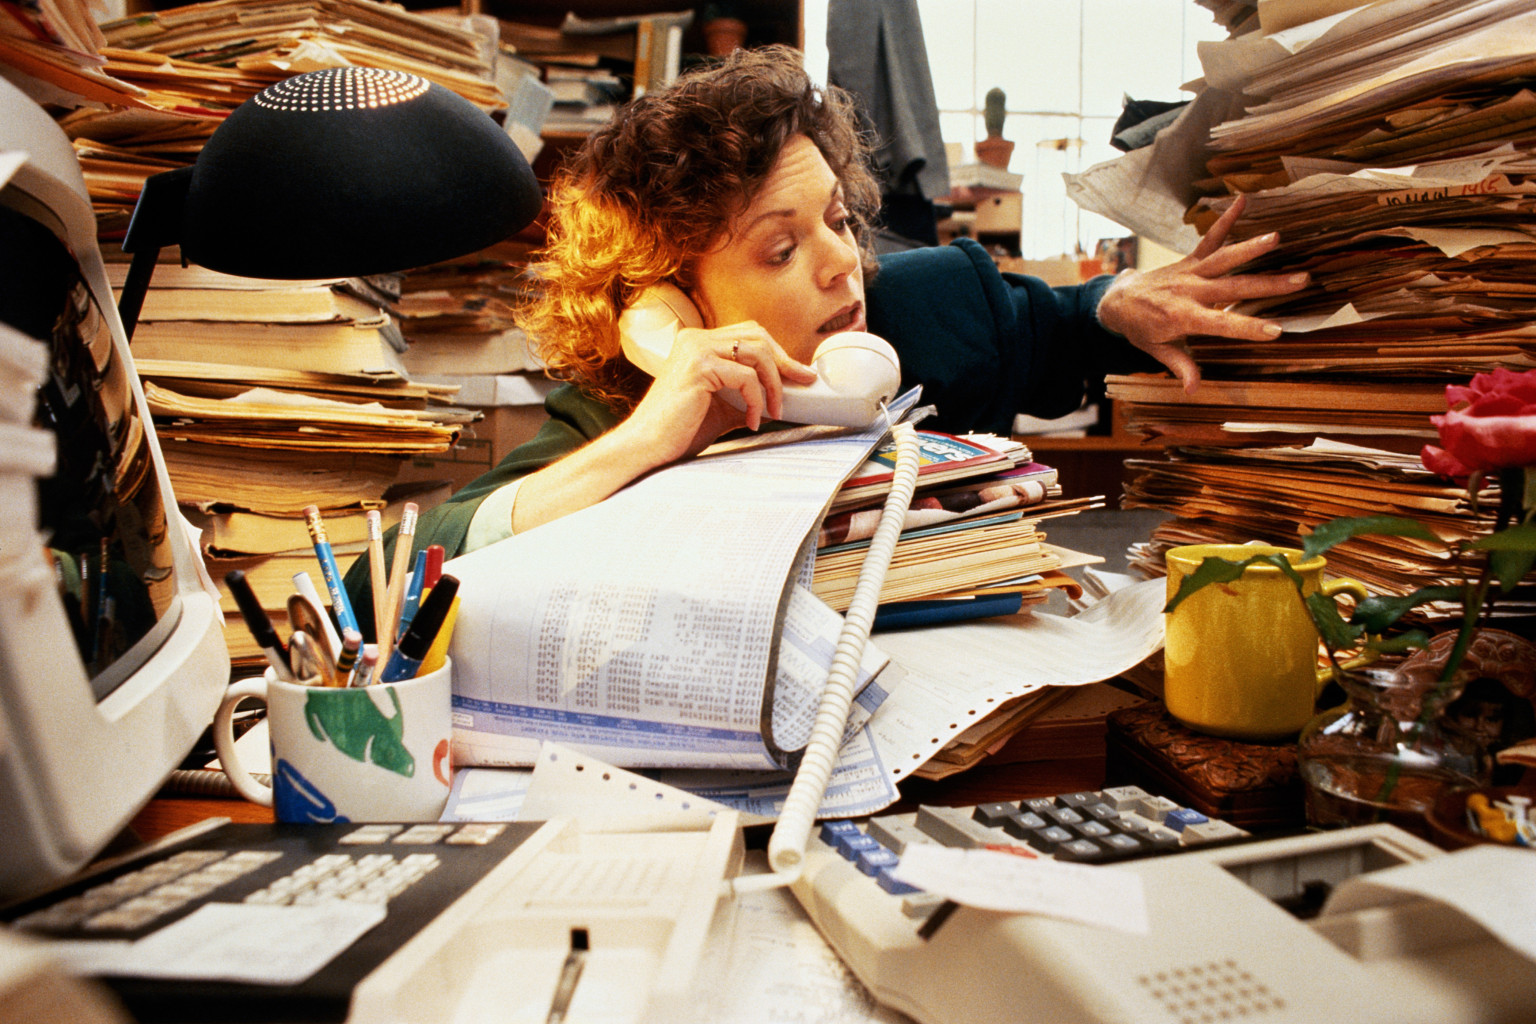 Businesswoman on phone at desk piled high with messy files